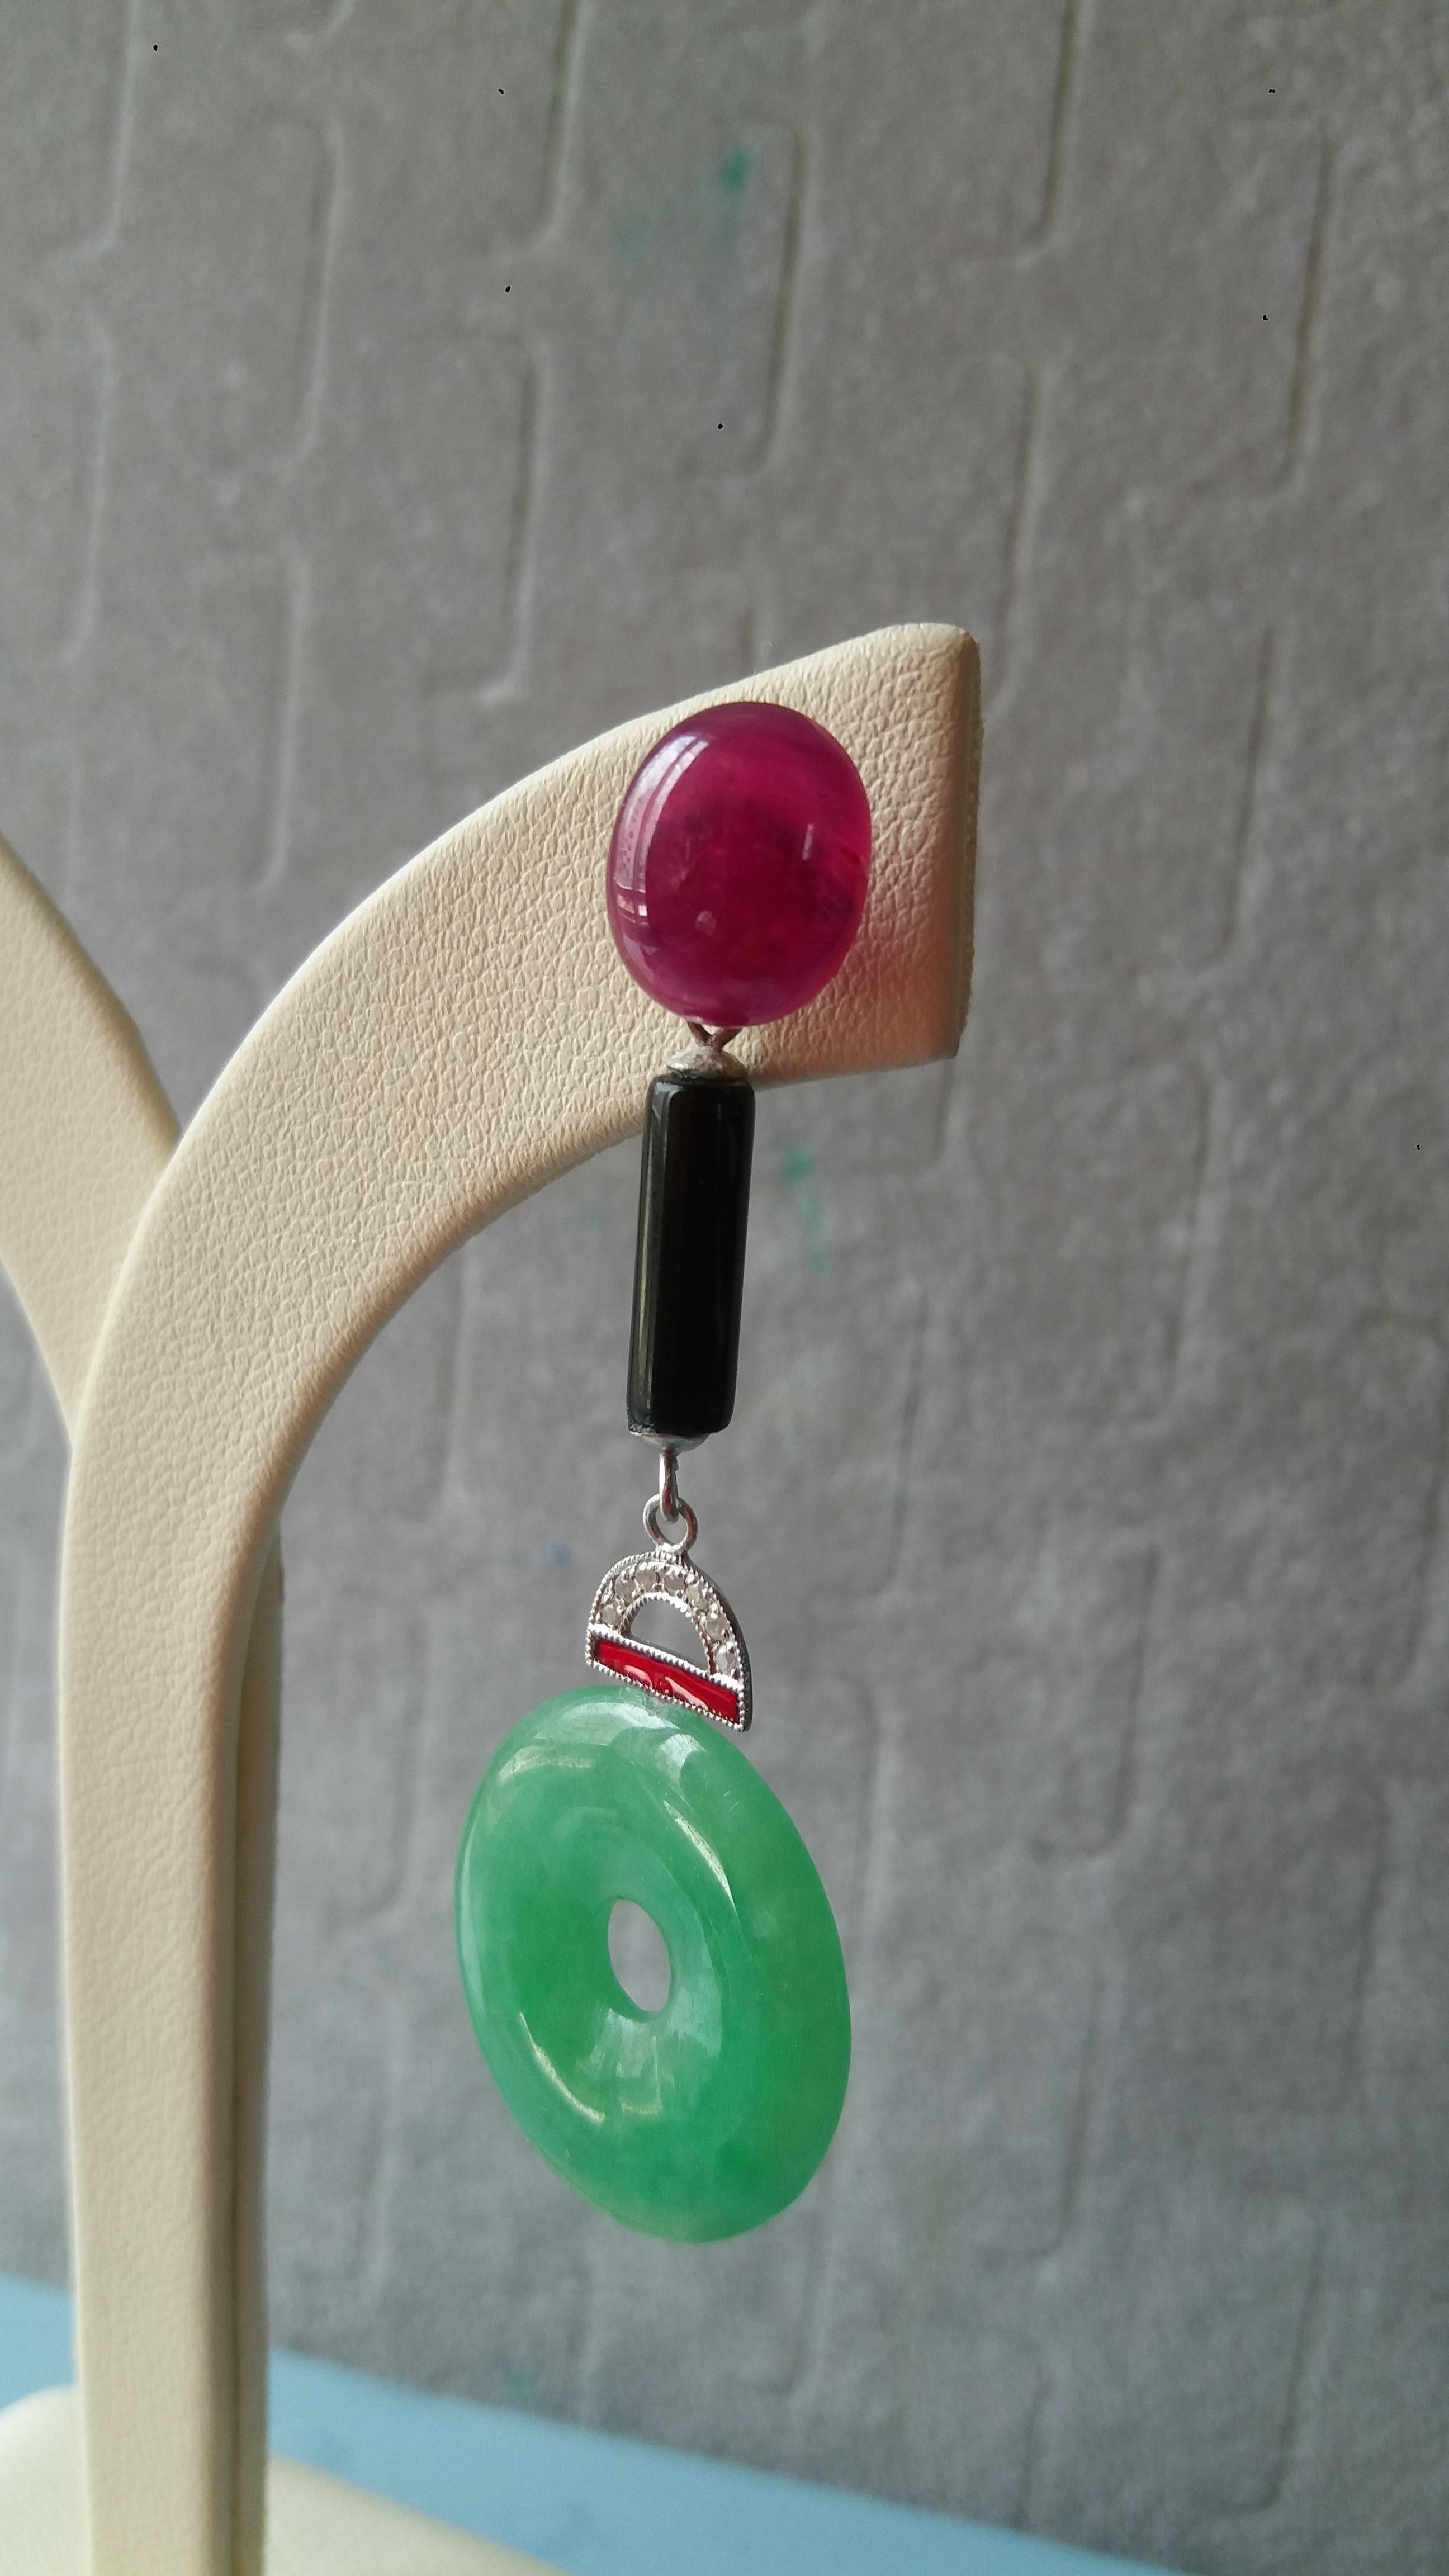 These earrings have in the upper part 2 large ruby cabochons, the central part consisting of 2 cylinders of black onyx and 2 elements in gold diamond and red enamel, while in the lower part we have 2 jade discs
In 1978 our workshop started in Italy